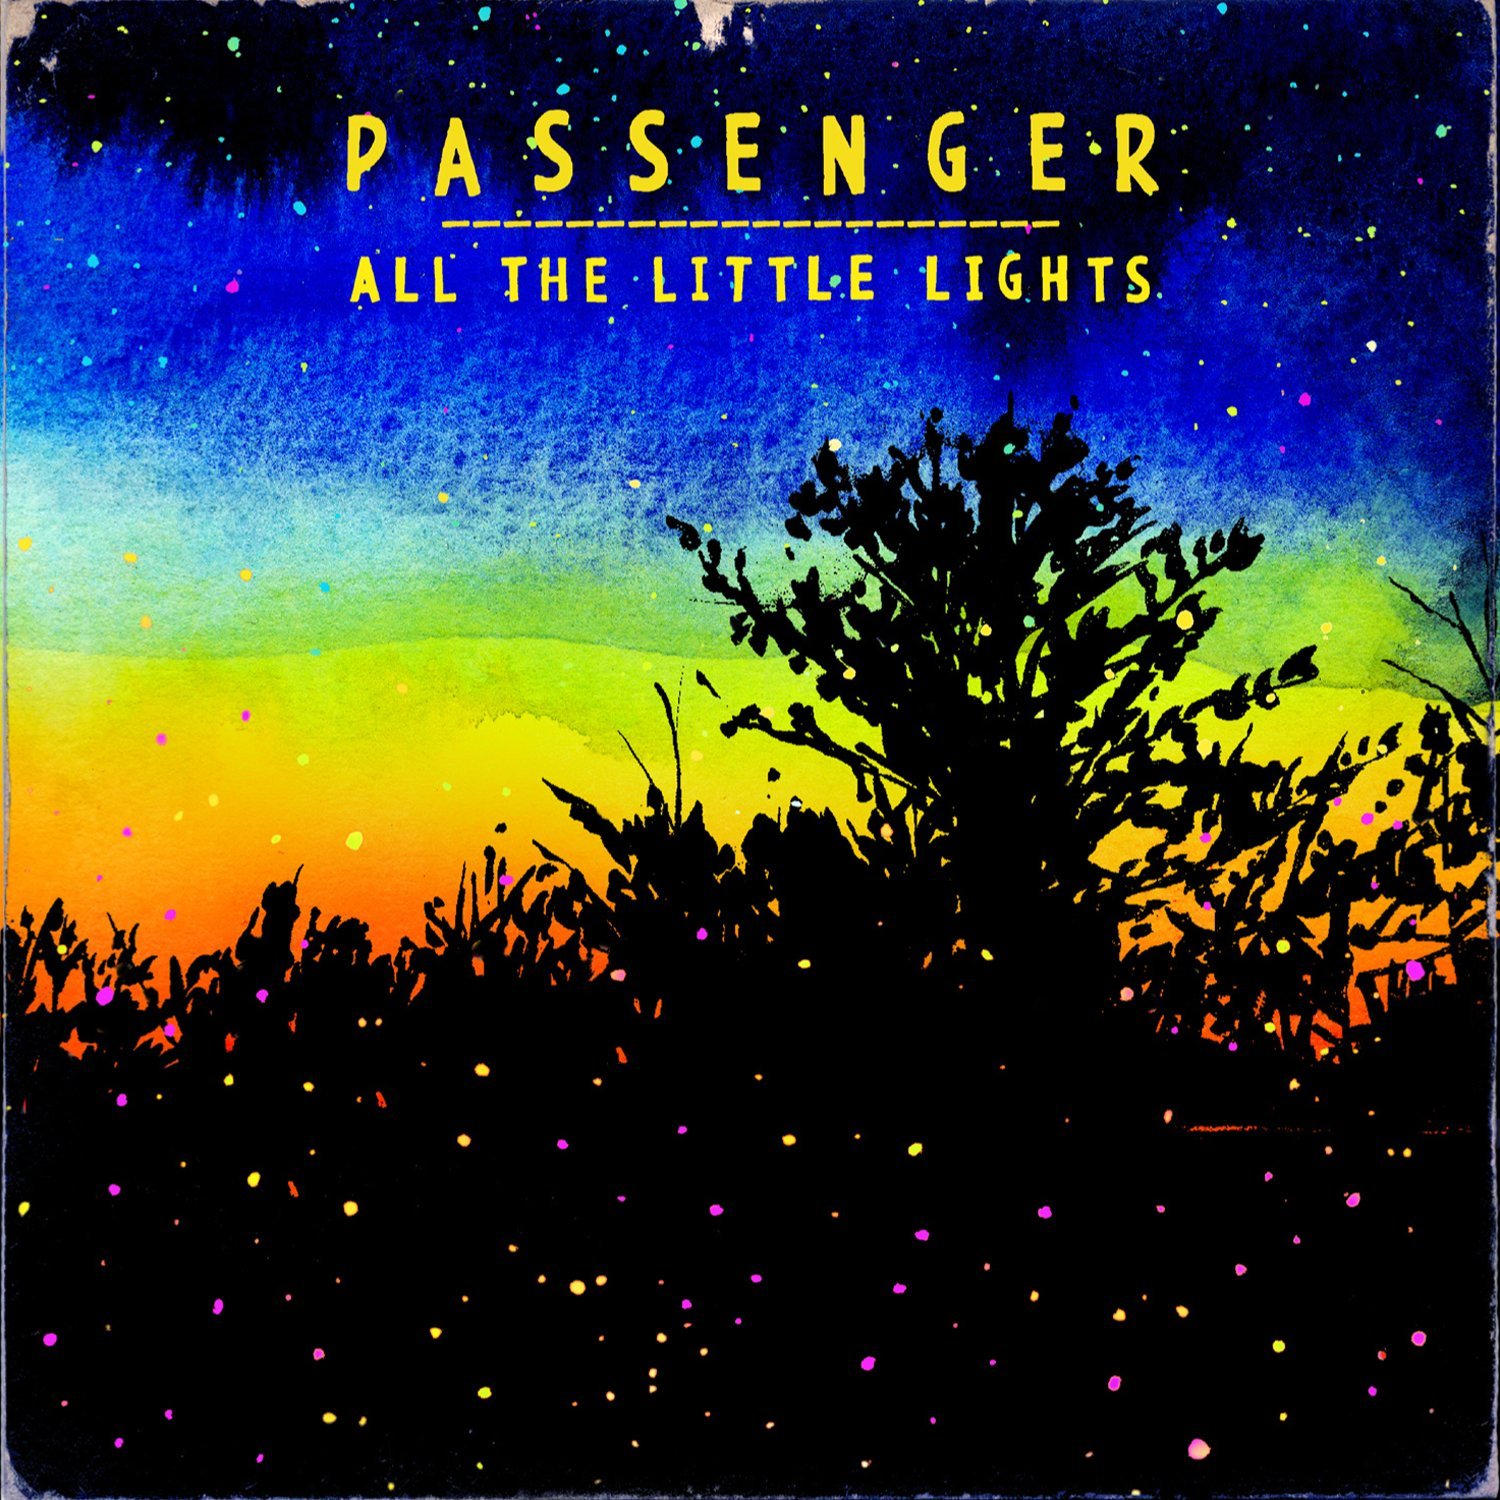 Passenger - All The Little Lights (Deluxe Edition) - Amazon.com Music